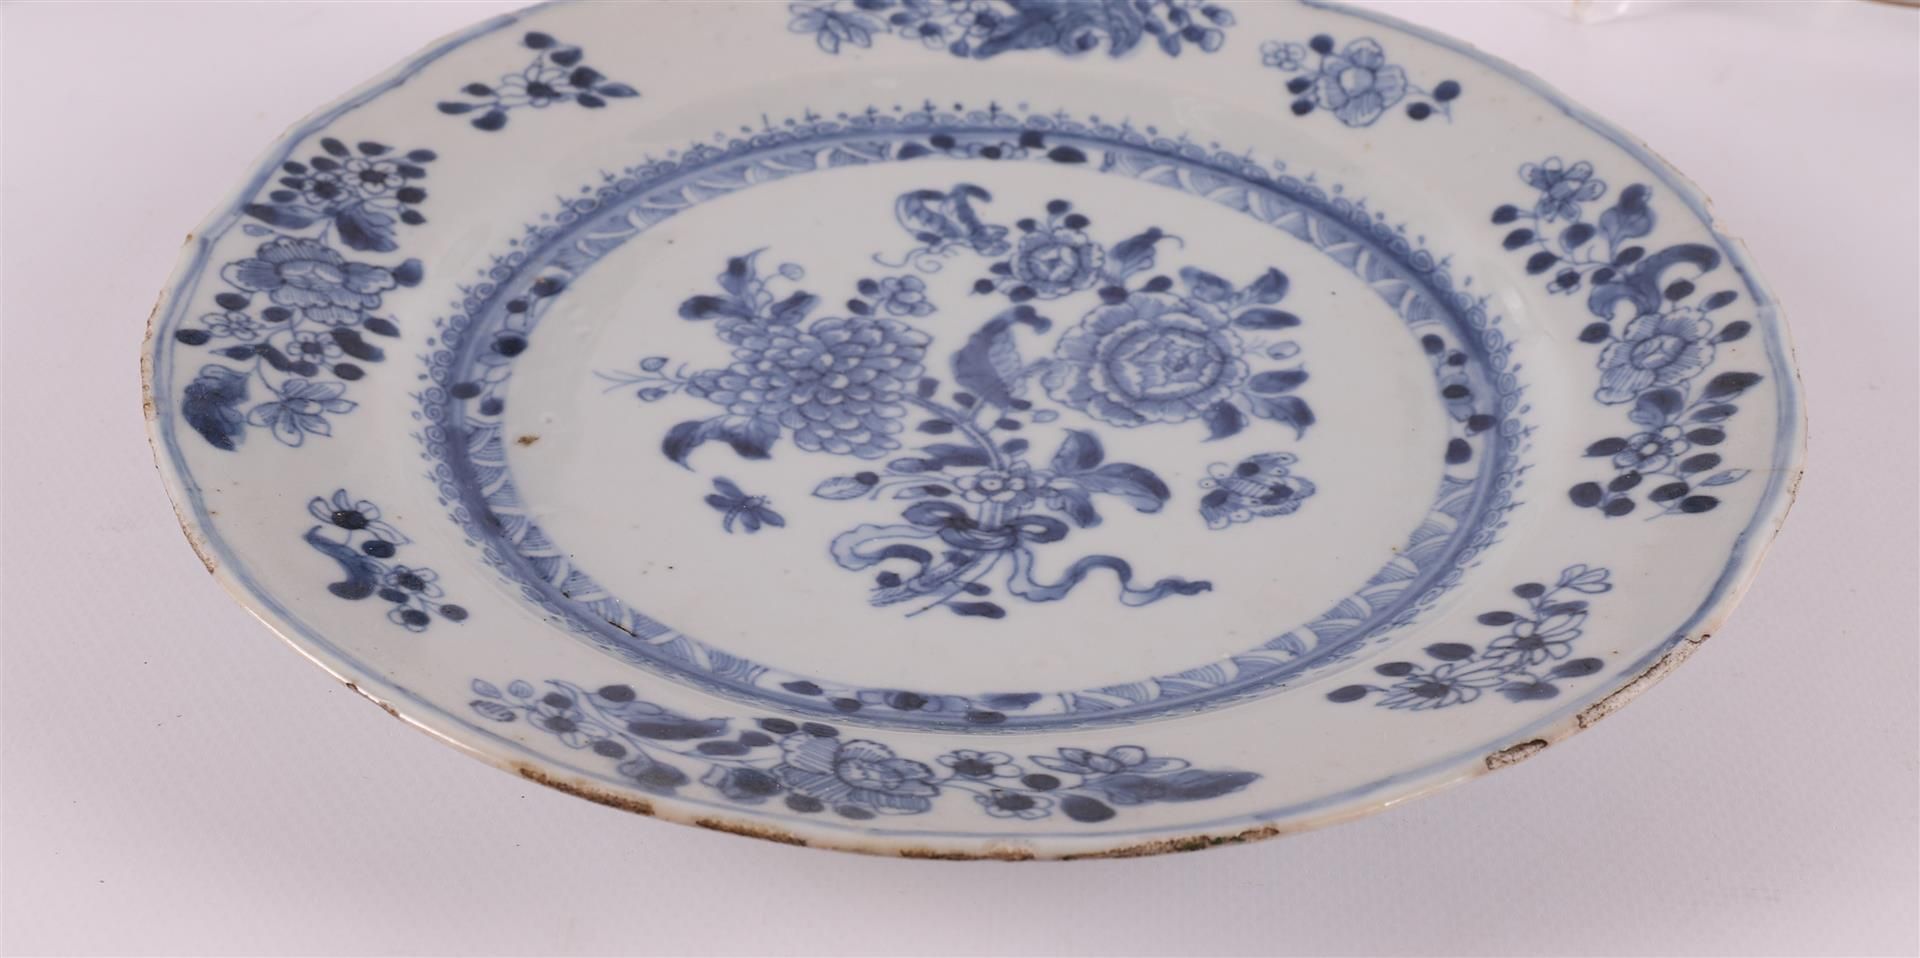 Three various blue/white porcelain plates, China, Qing Dynasty, around 1800. - Image 3 of 10